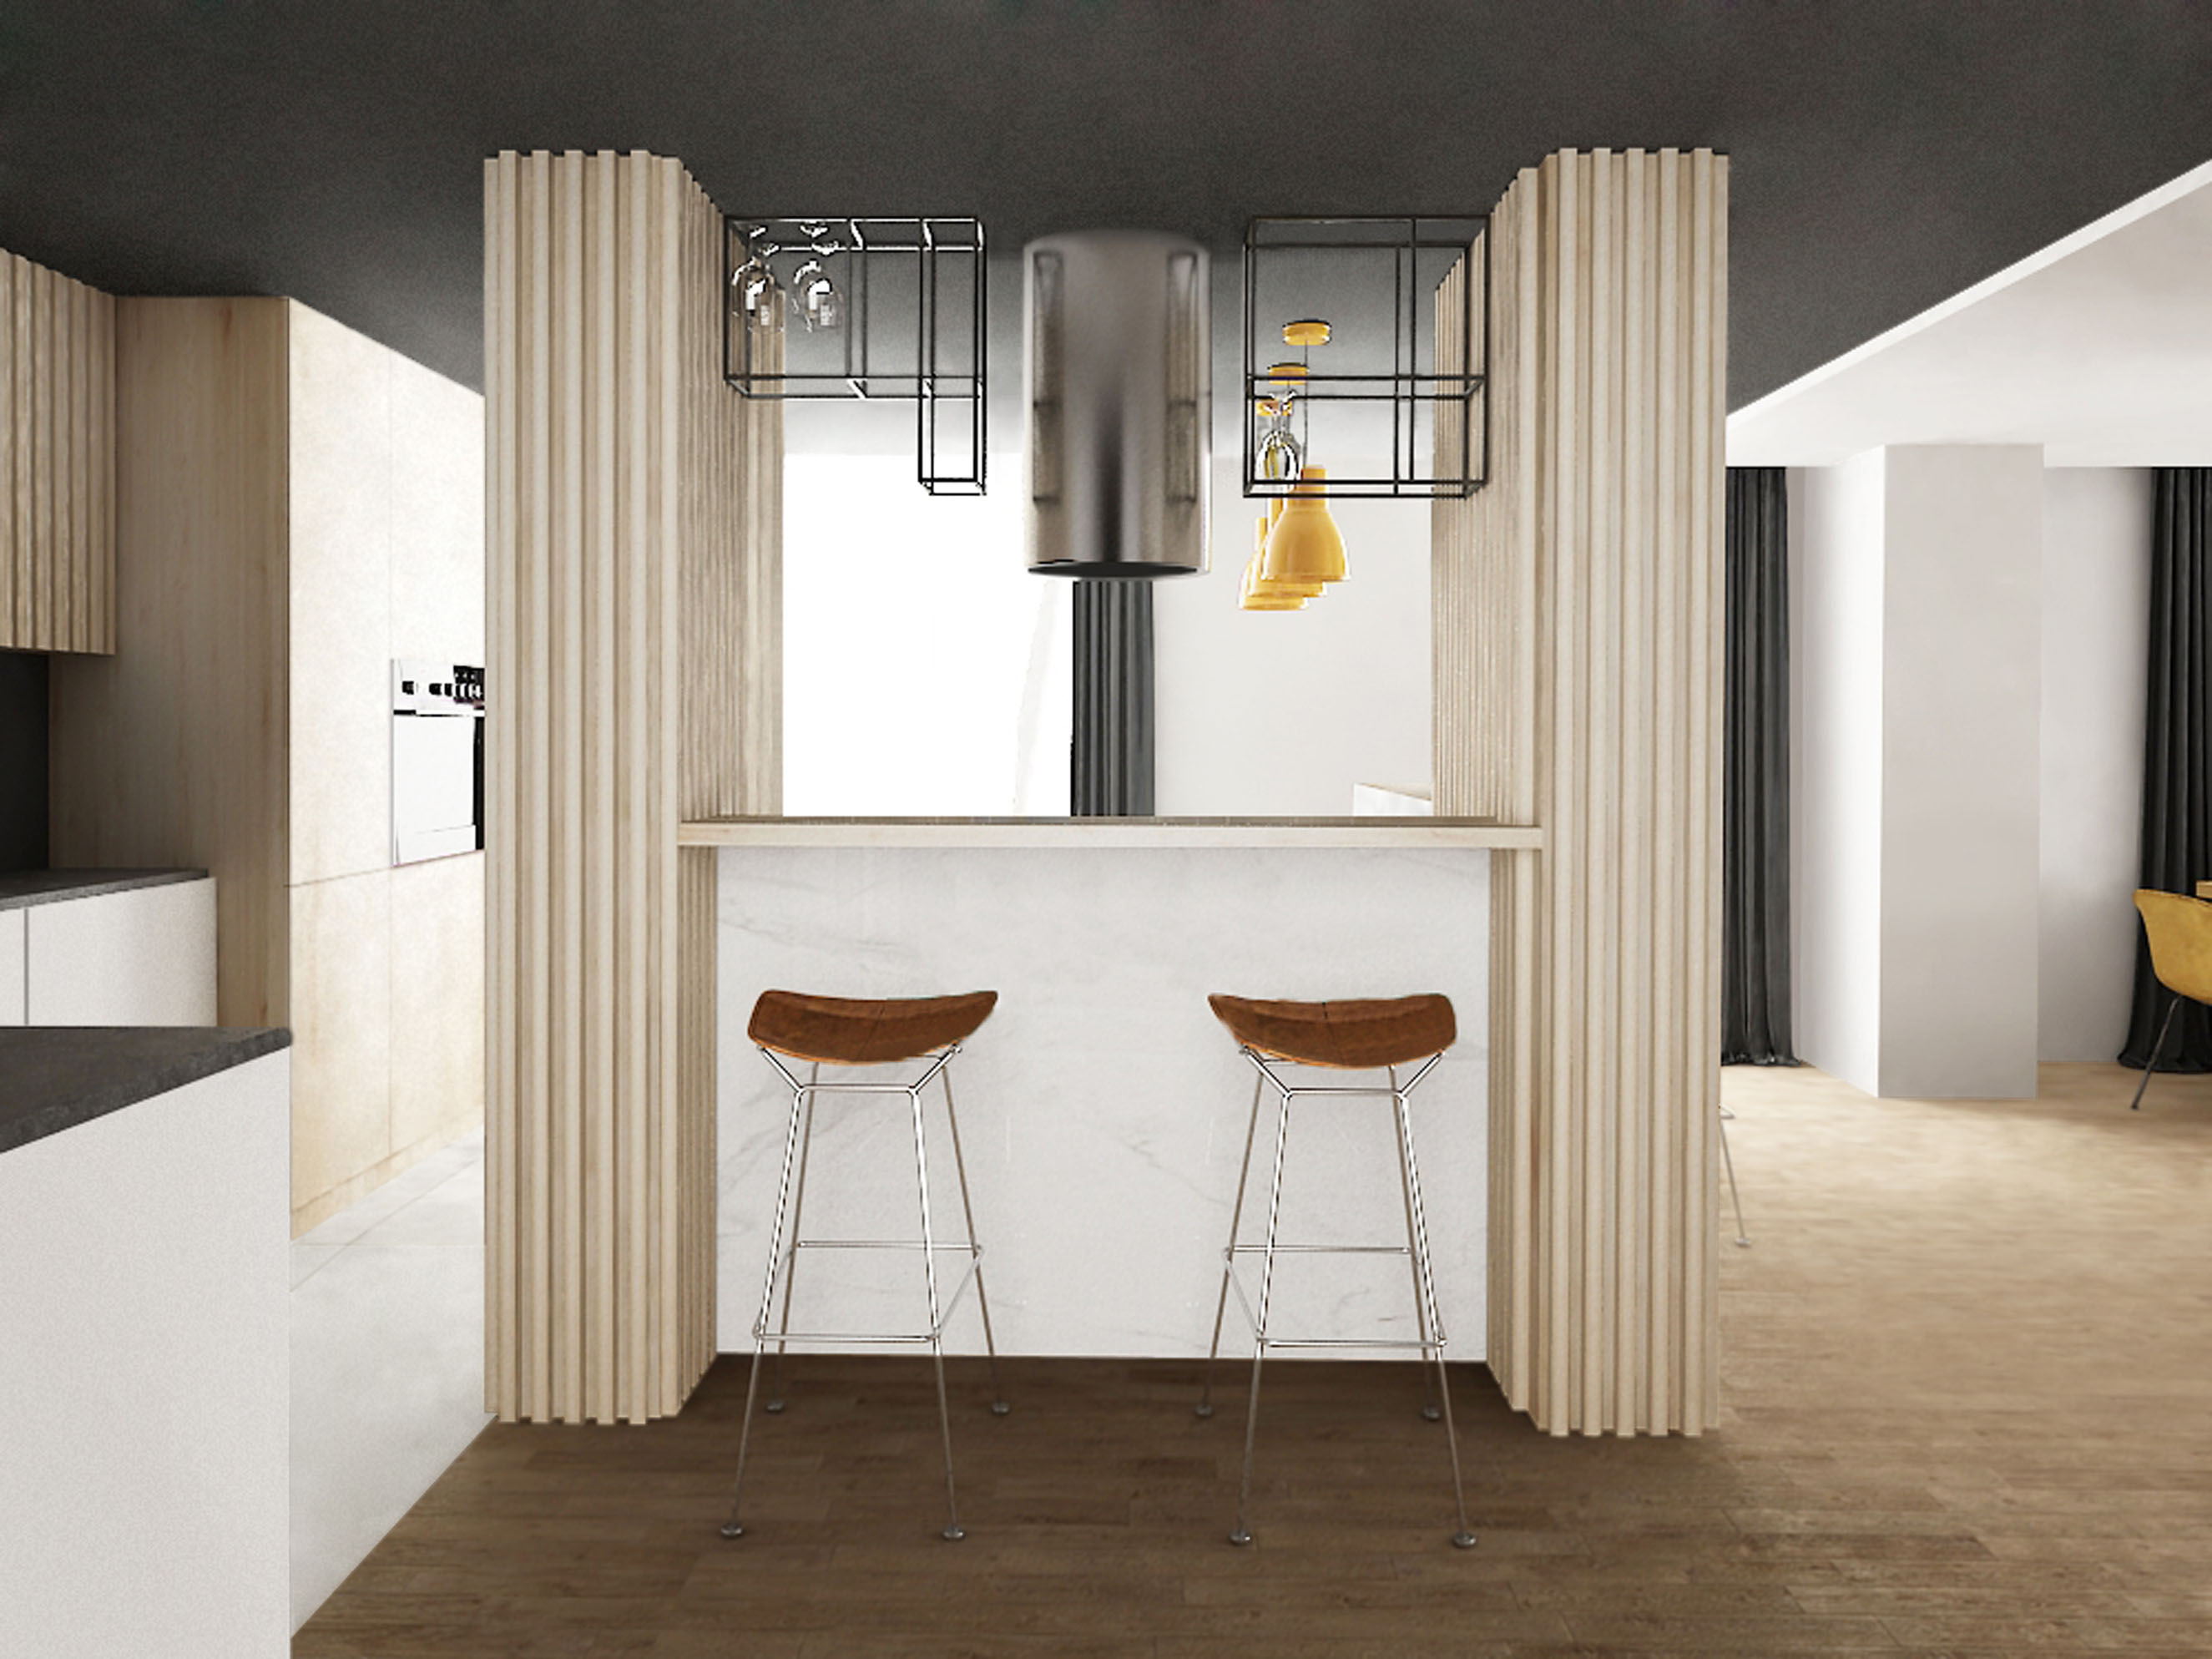 Modern kitchen island with bar stools, wire frame shelves and wooden panels